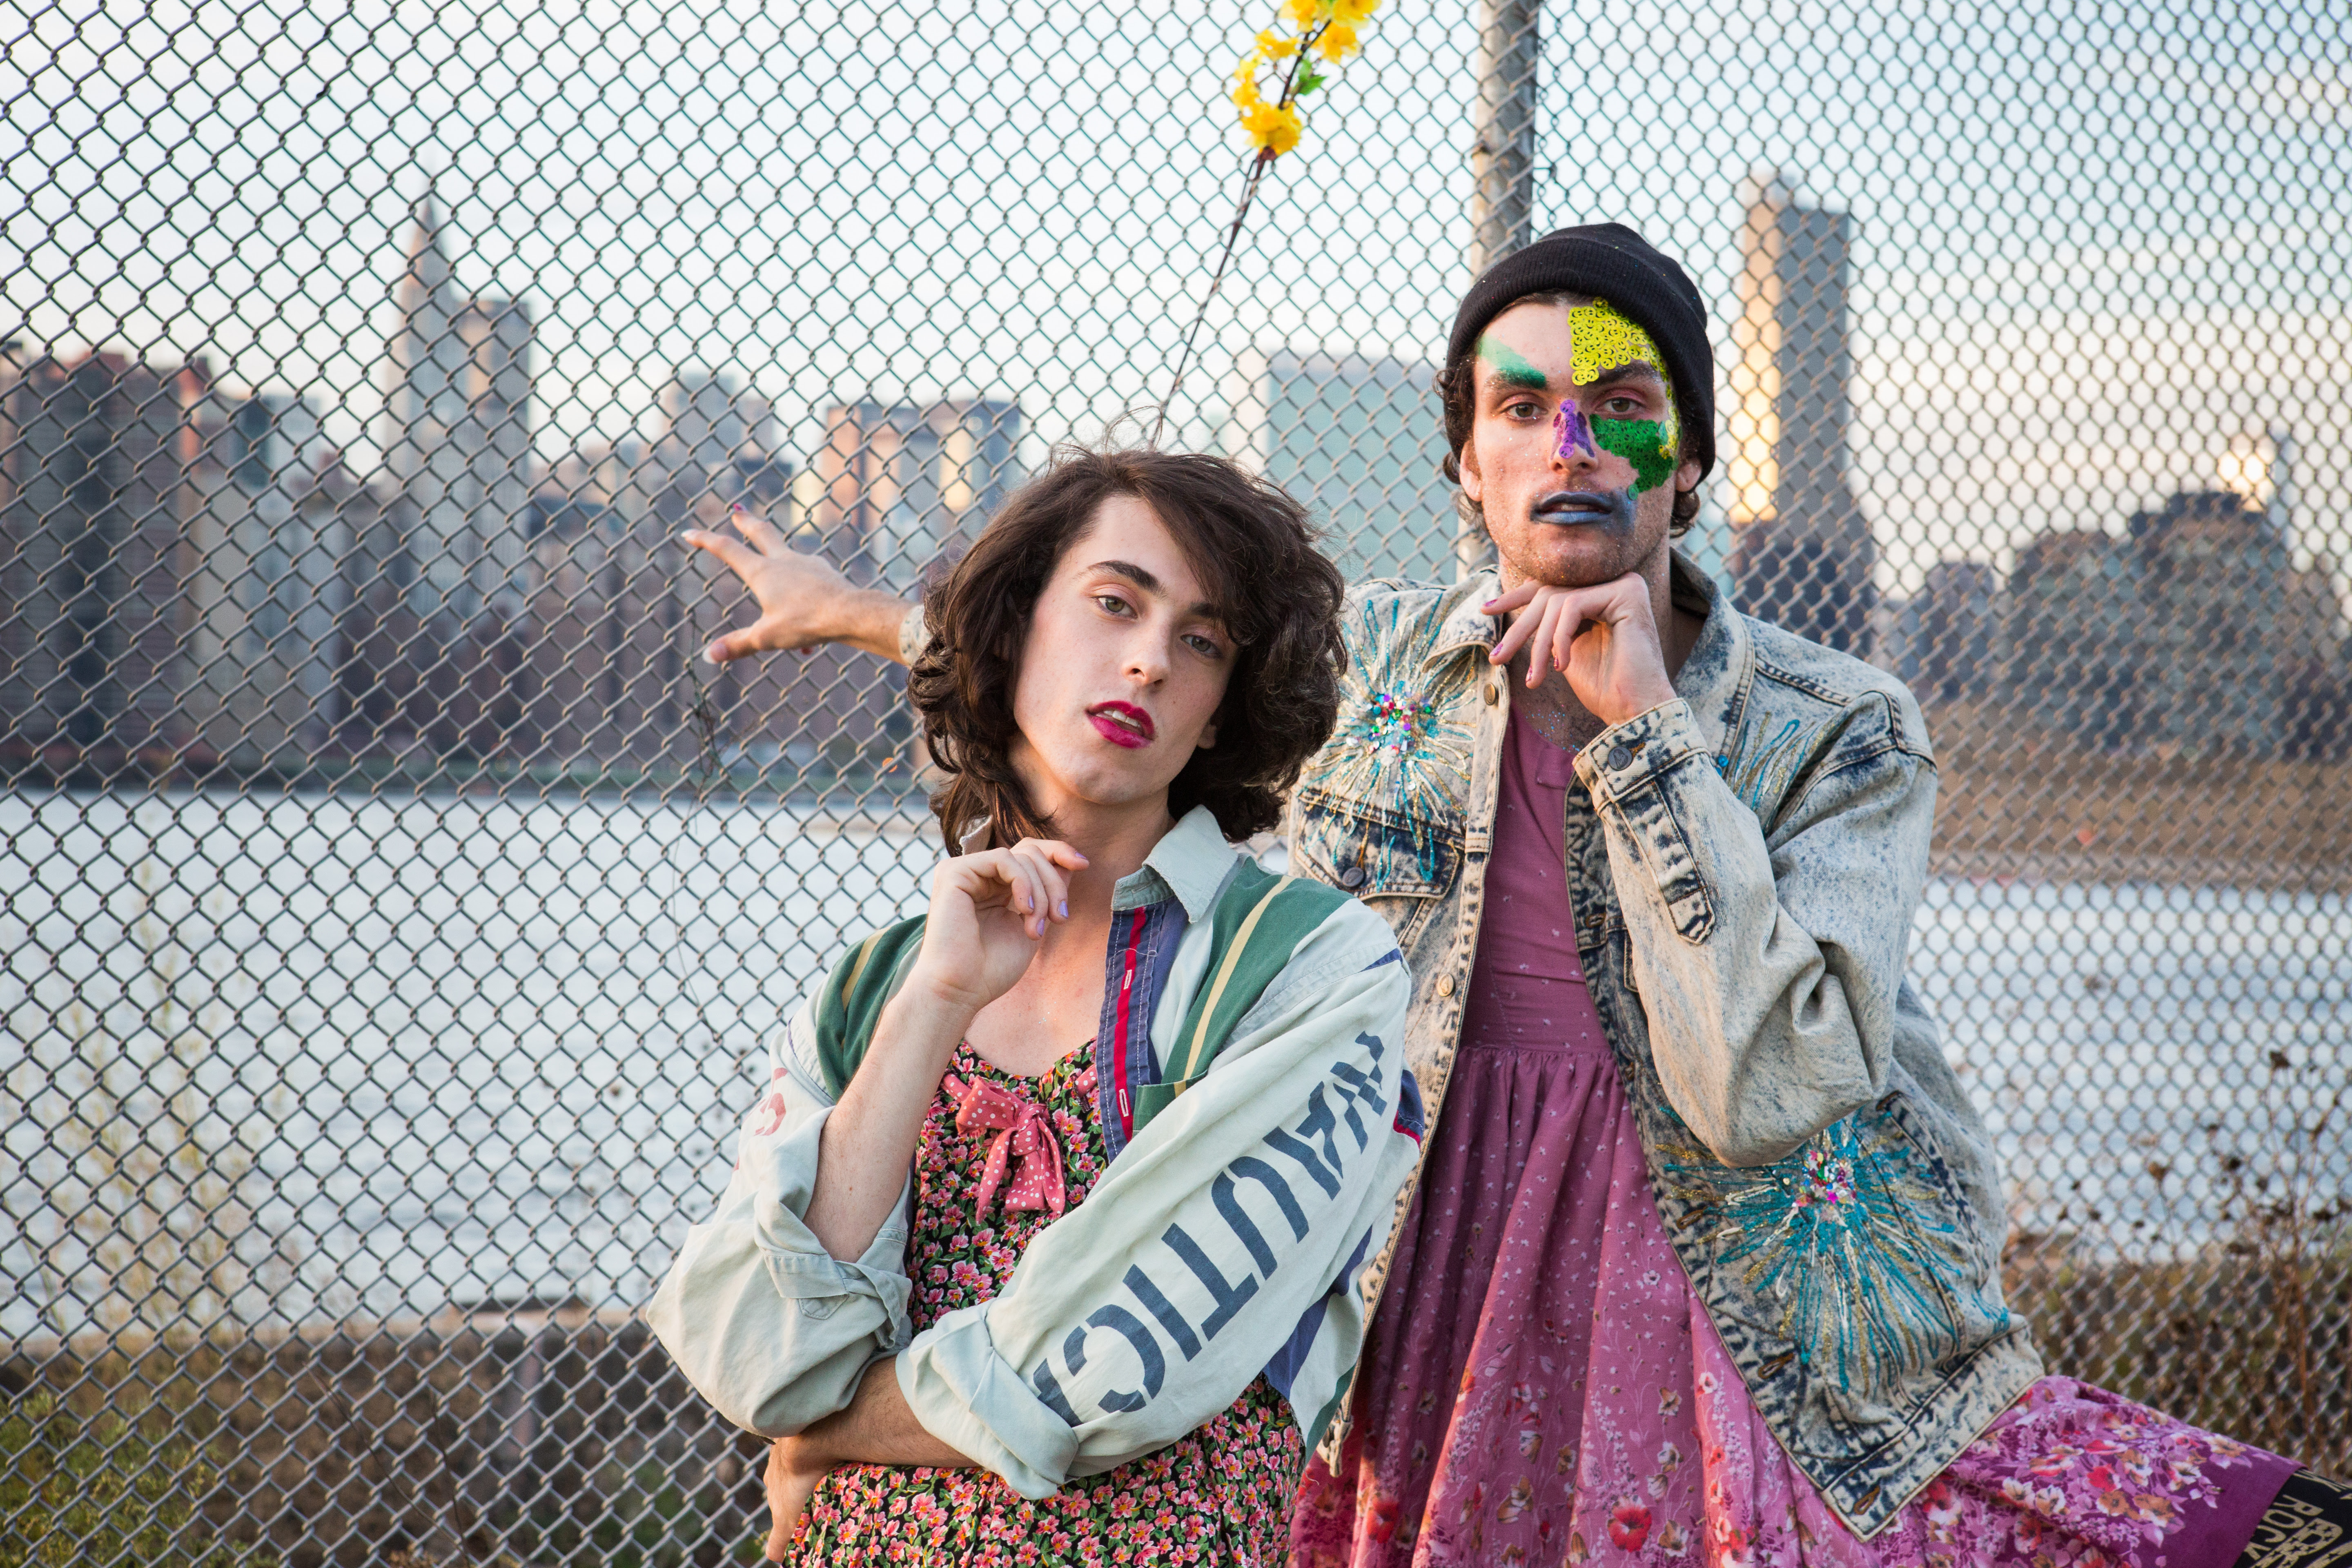 PWR BTTM share new track "Answer My Text"